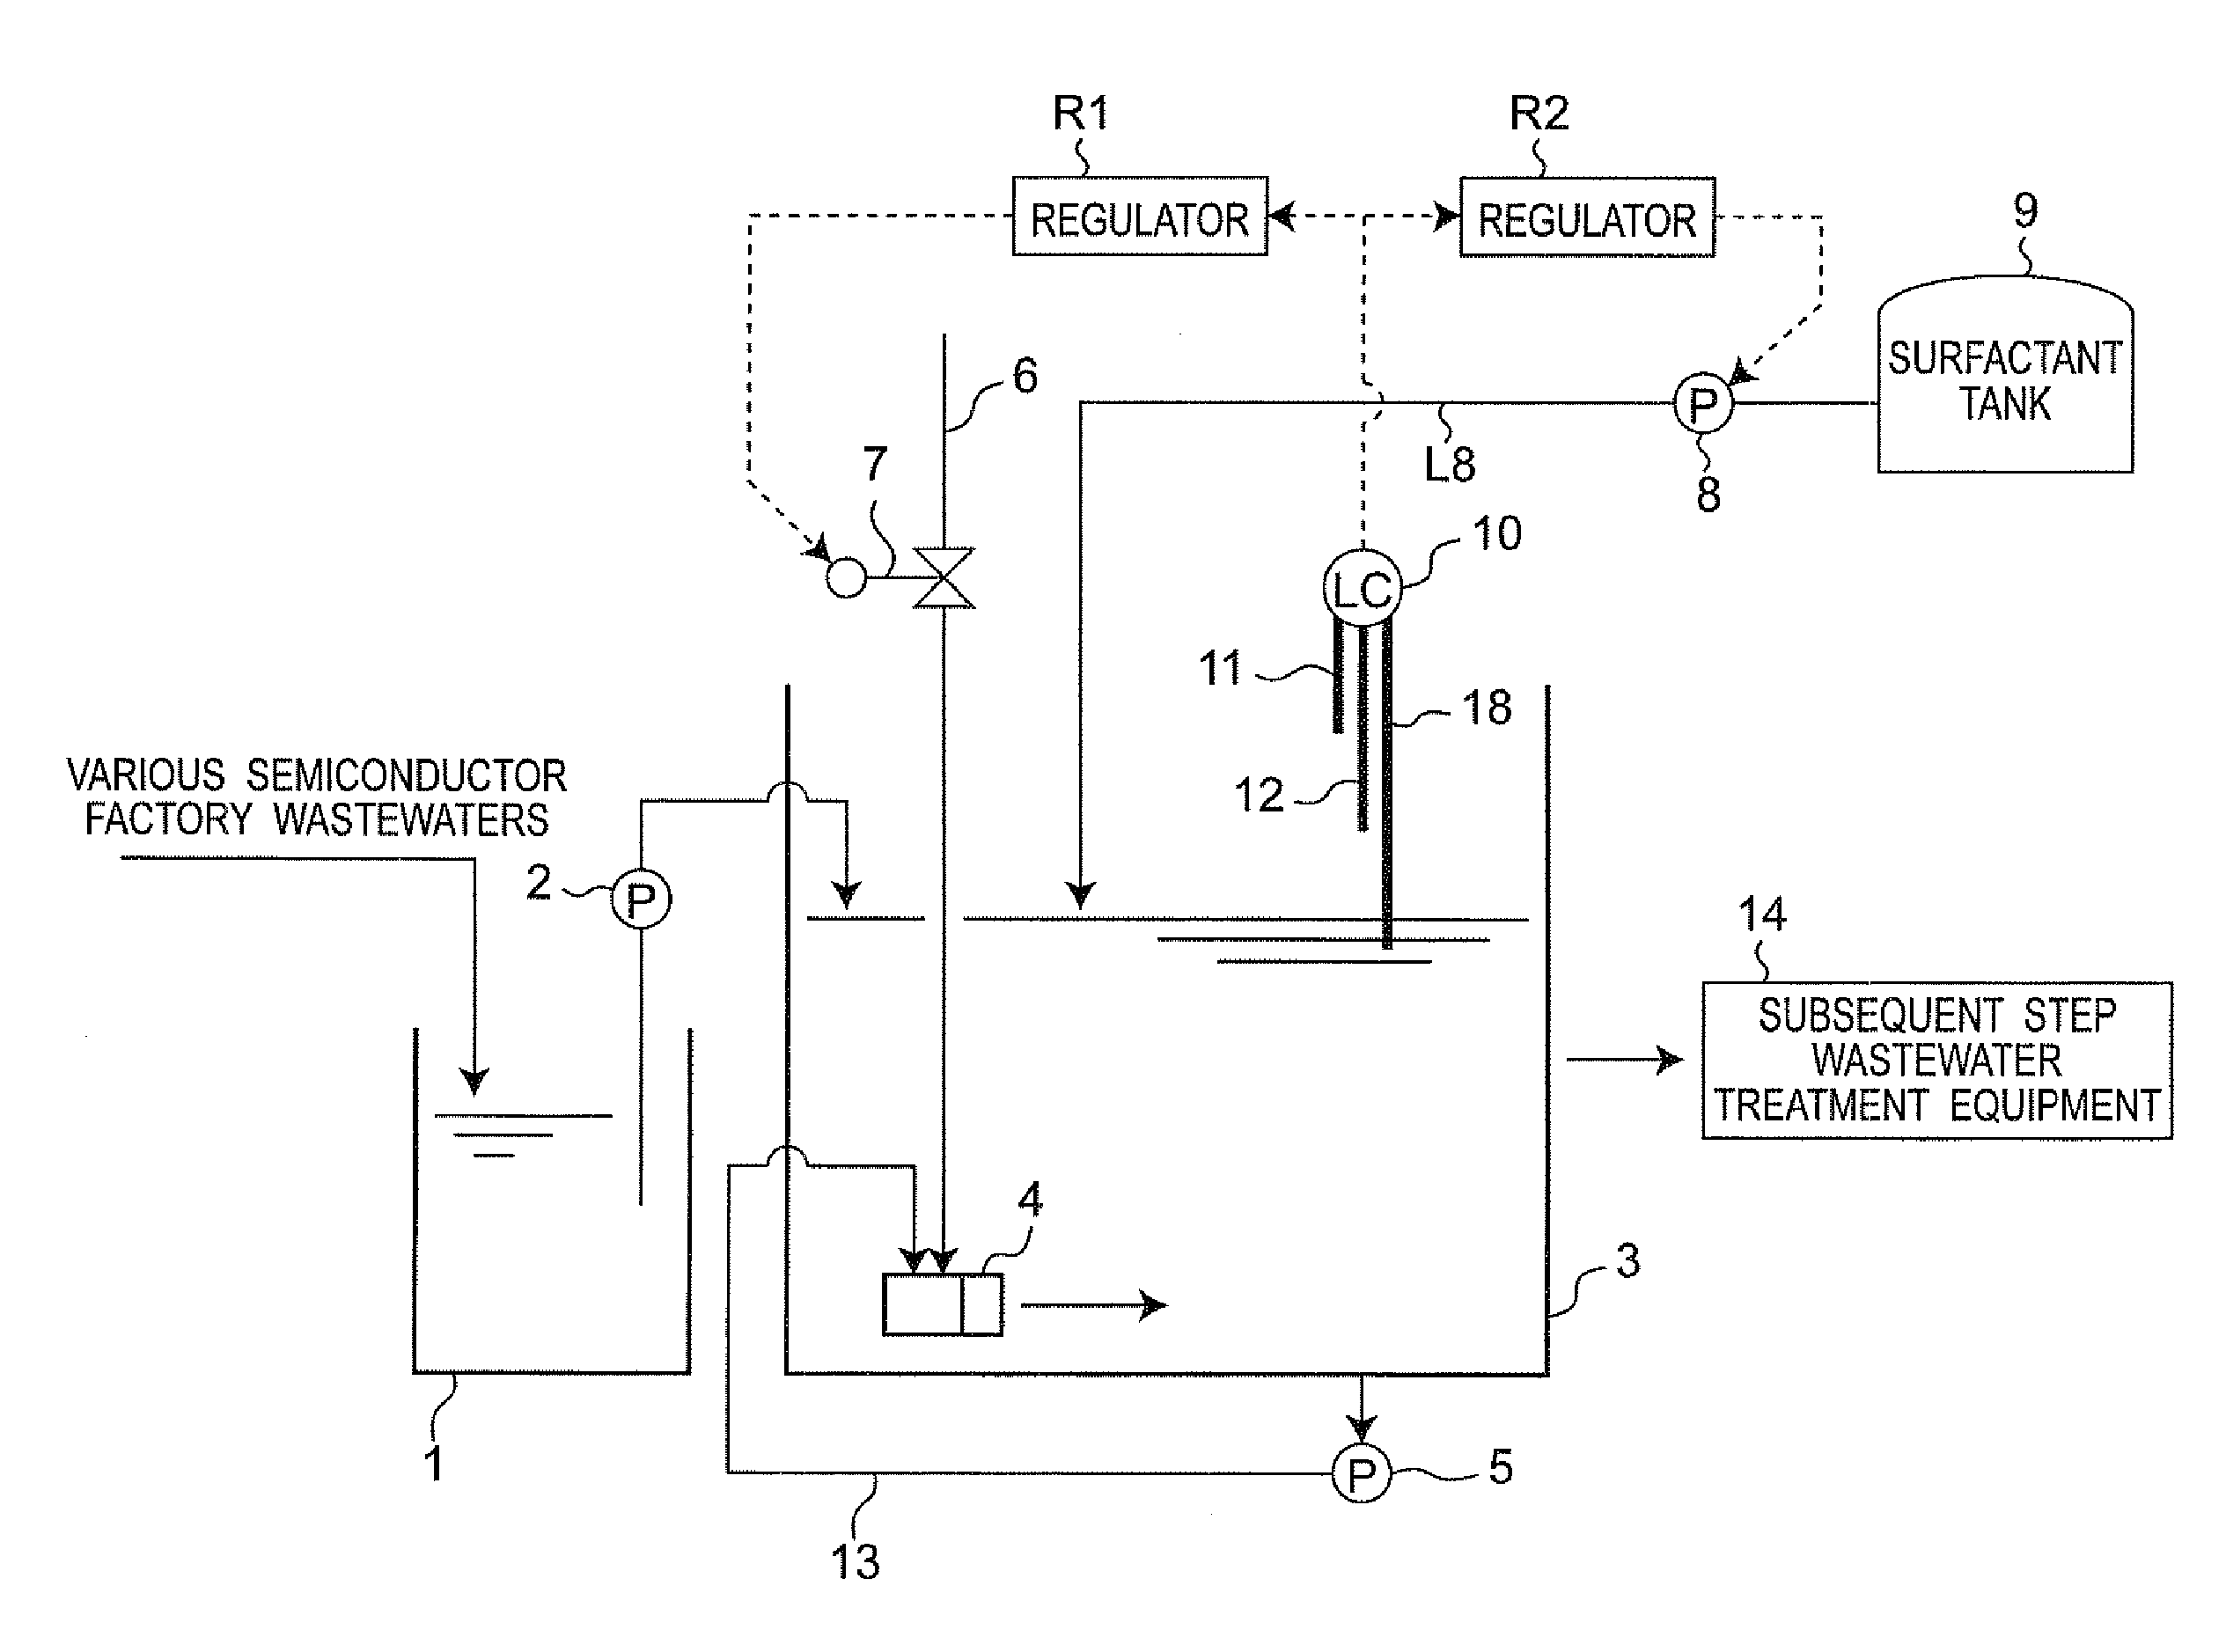 Wastewater treatment equipment and method of wastewater treatment